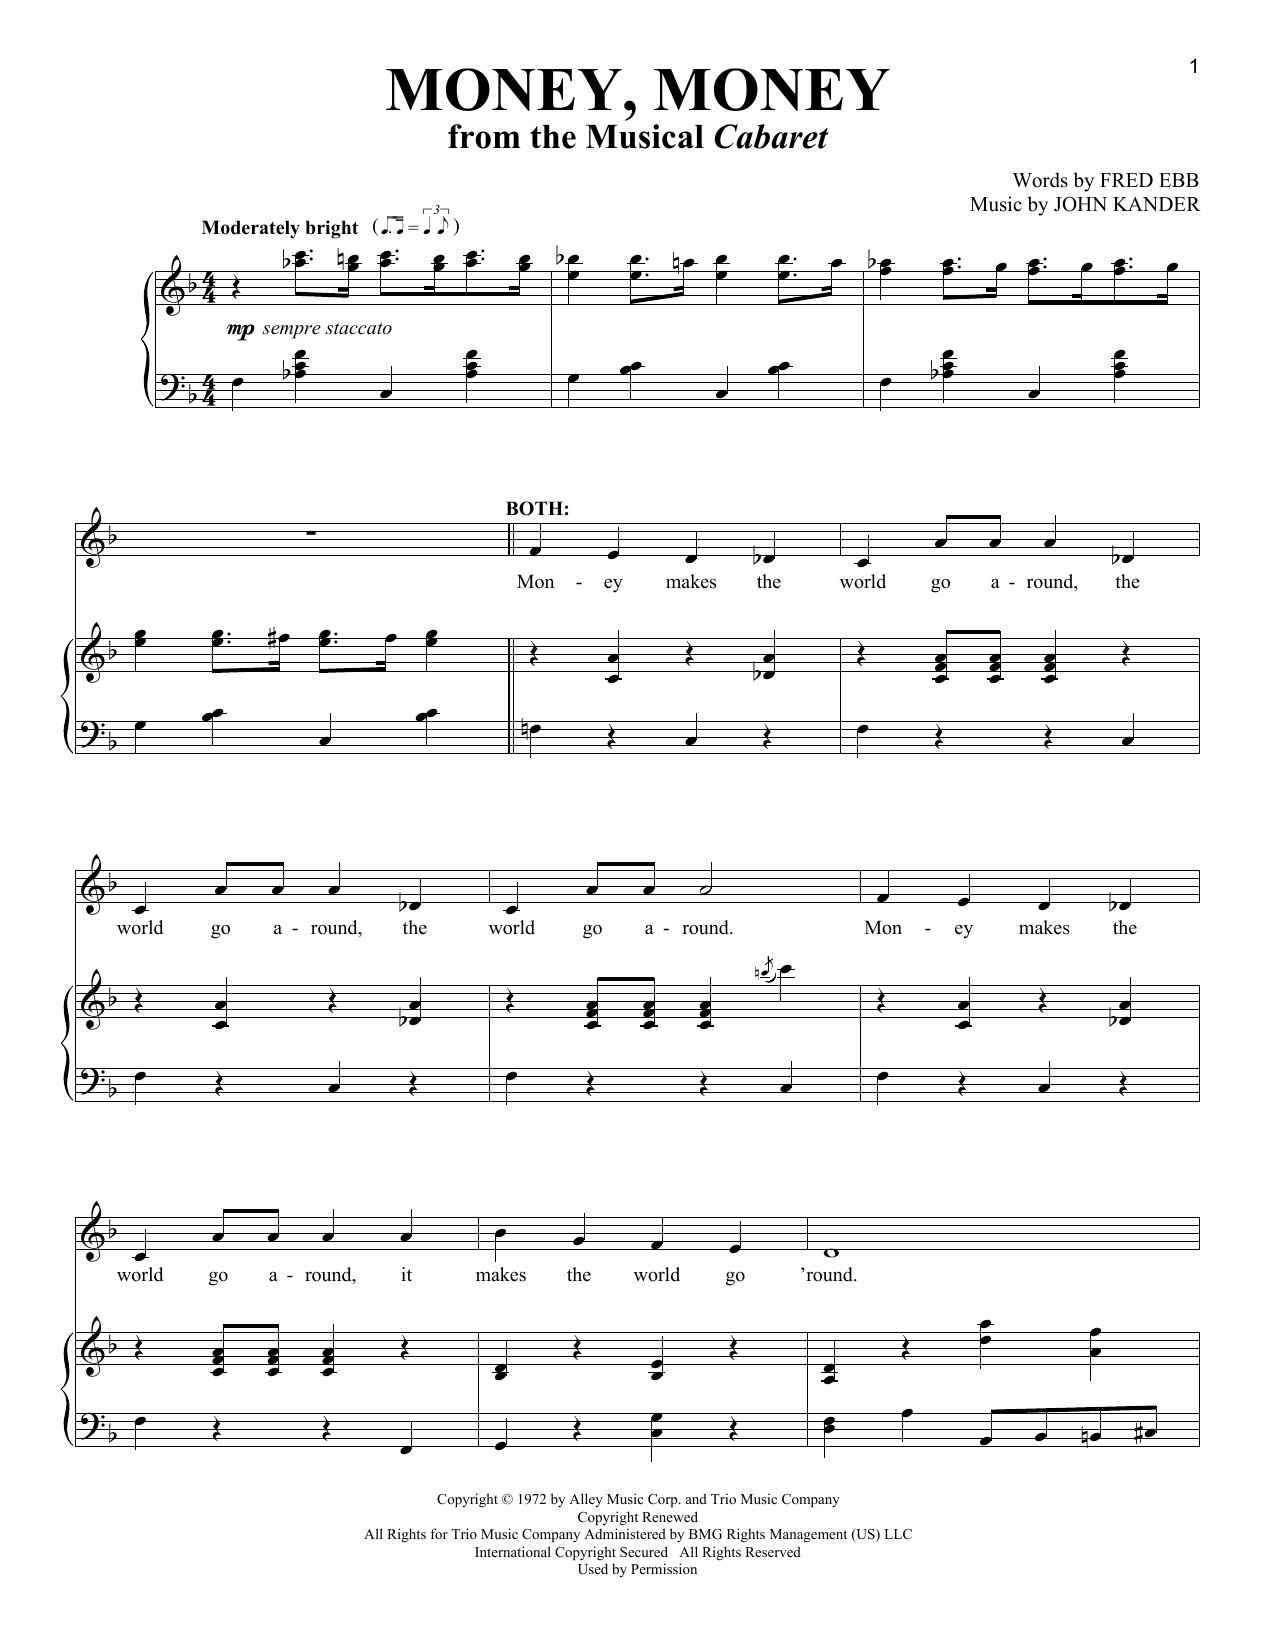 Fred Ebb Money, Money sheet music notes and chords. Download Printable PDF.